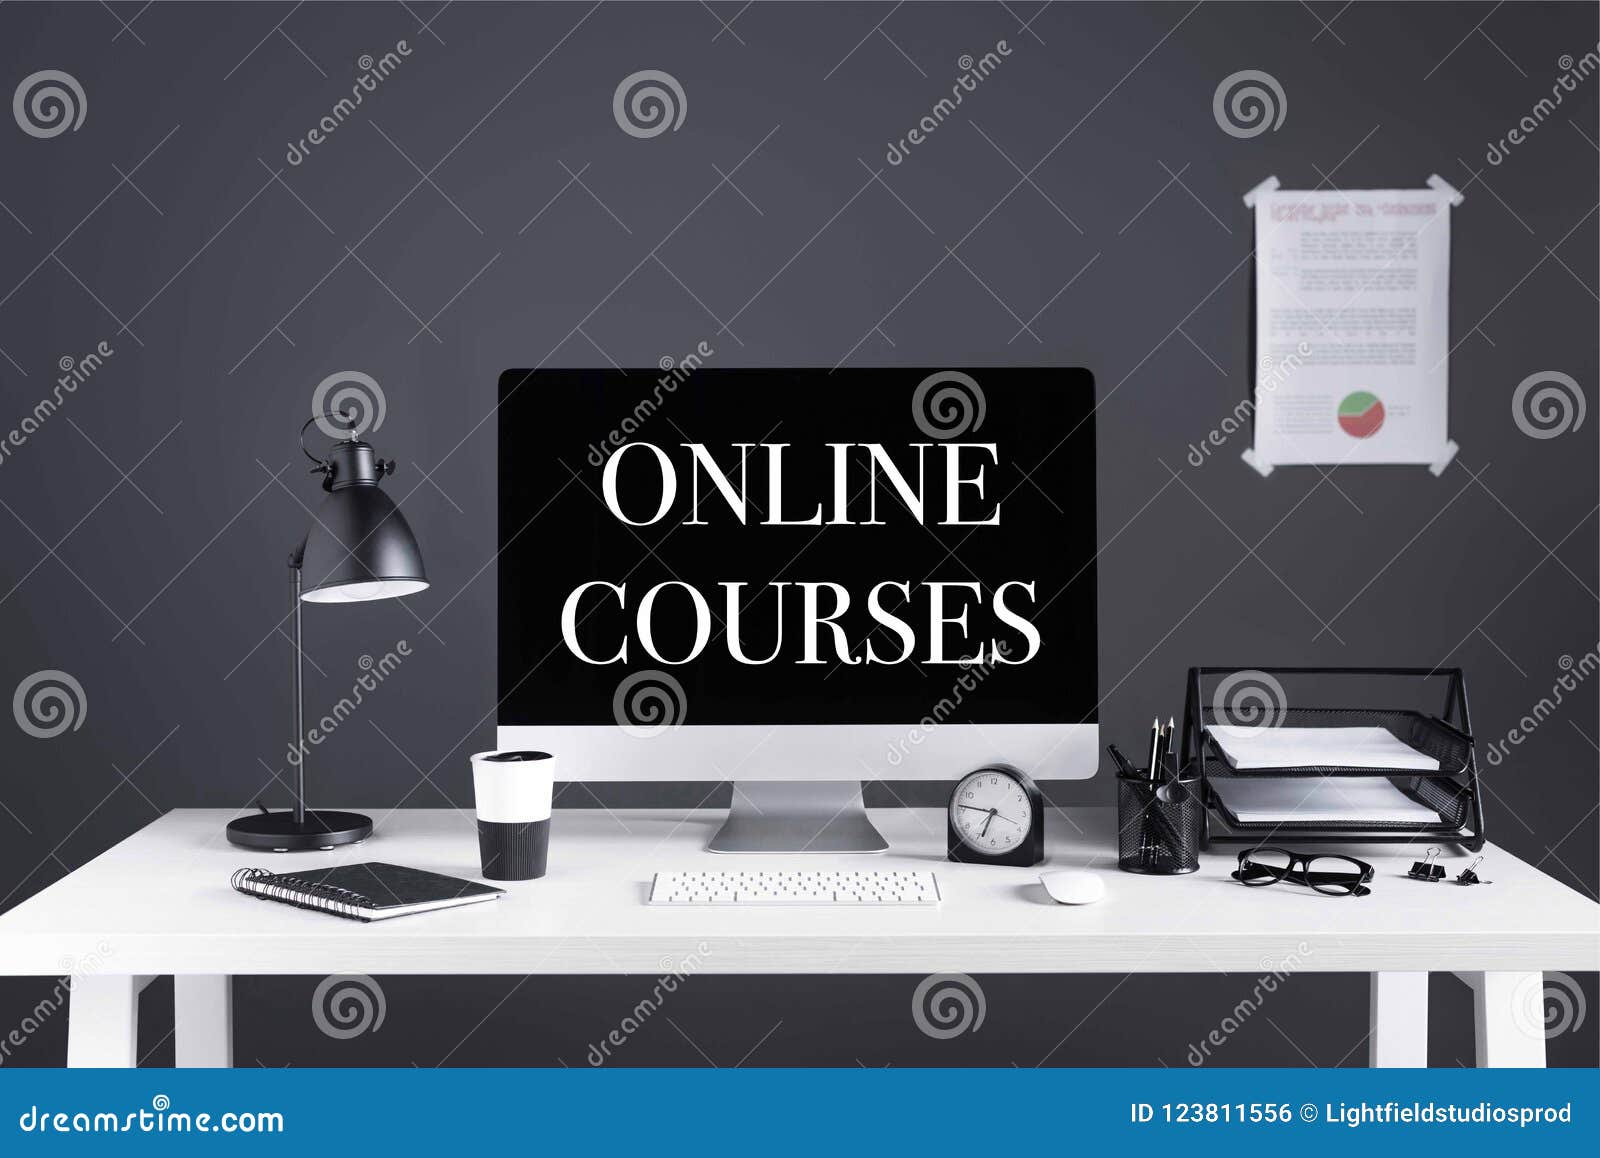 desktop computer with online courses inscription on screen, business chart, clock and office supplies